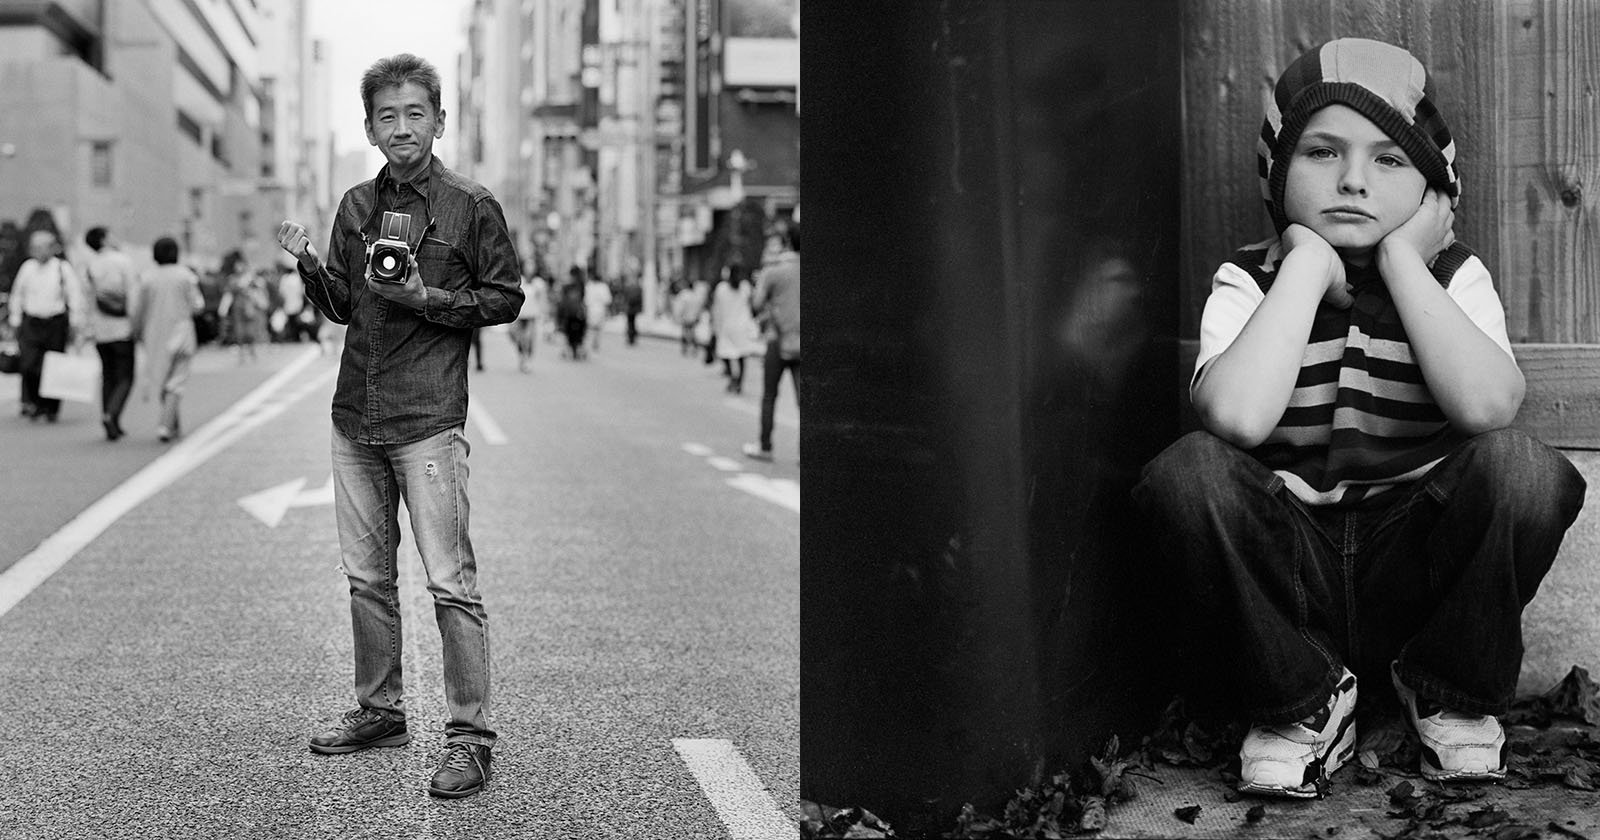  things learned from years shooting hasselblad 